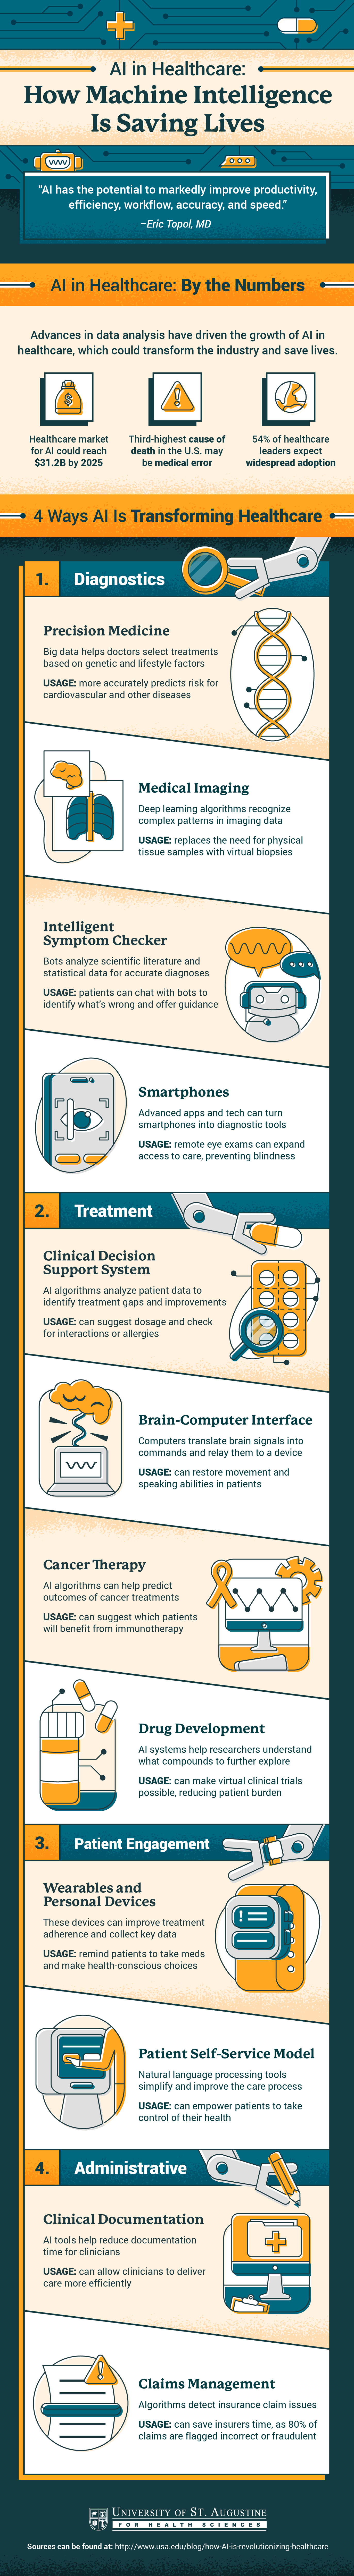 Infographic - AI in Healthcare: How Machine Learning Is Saving Lives